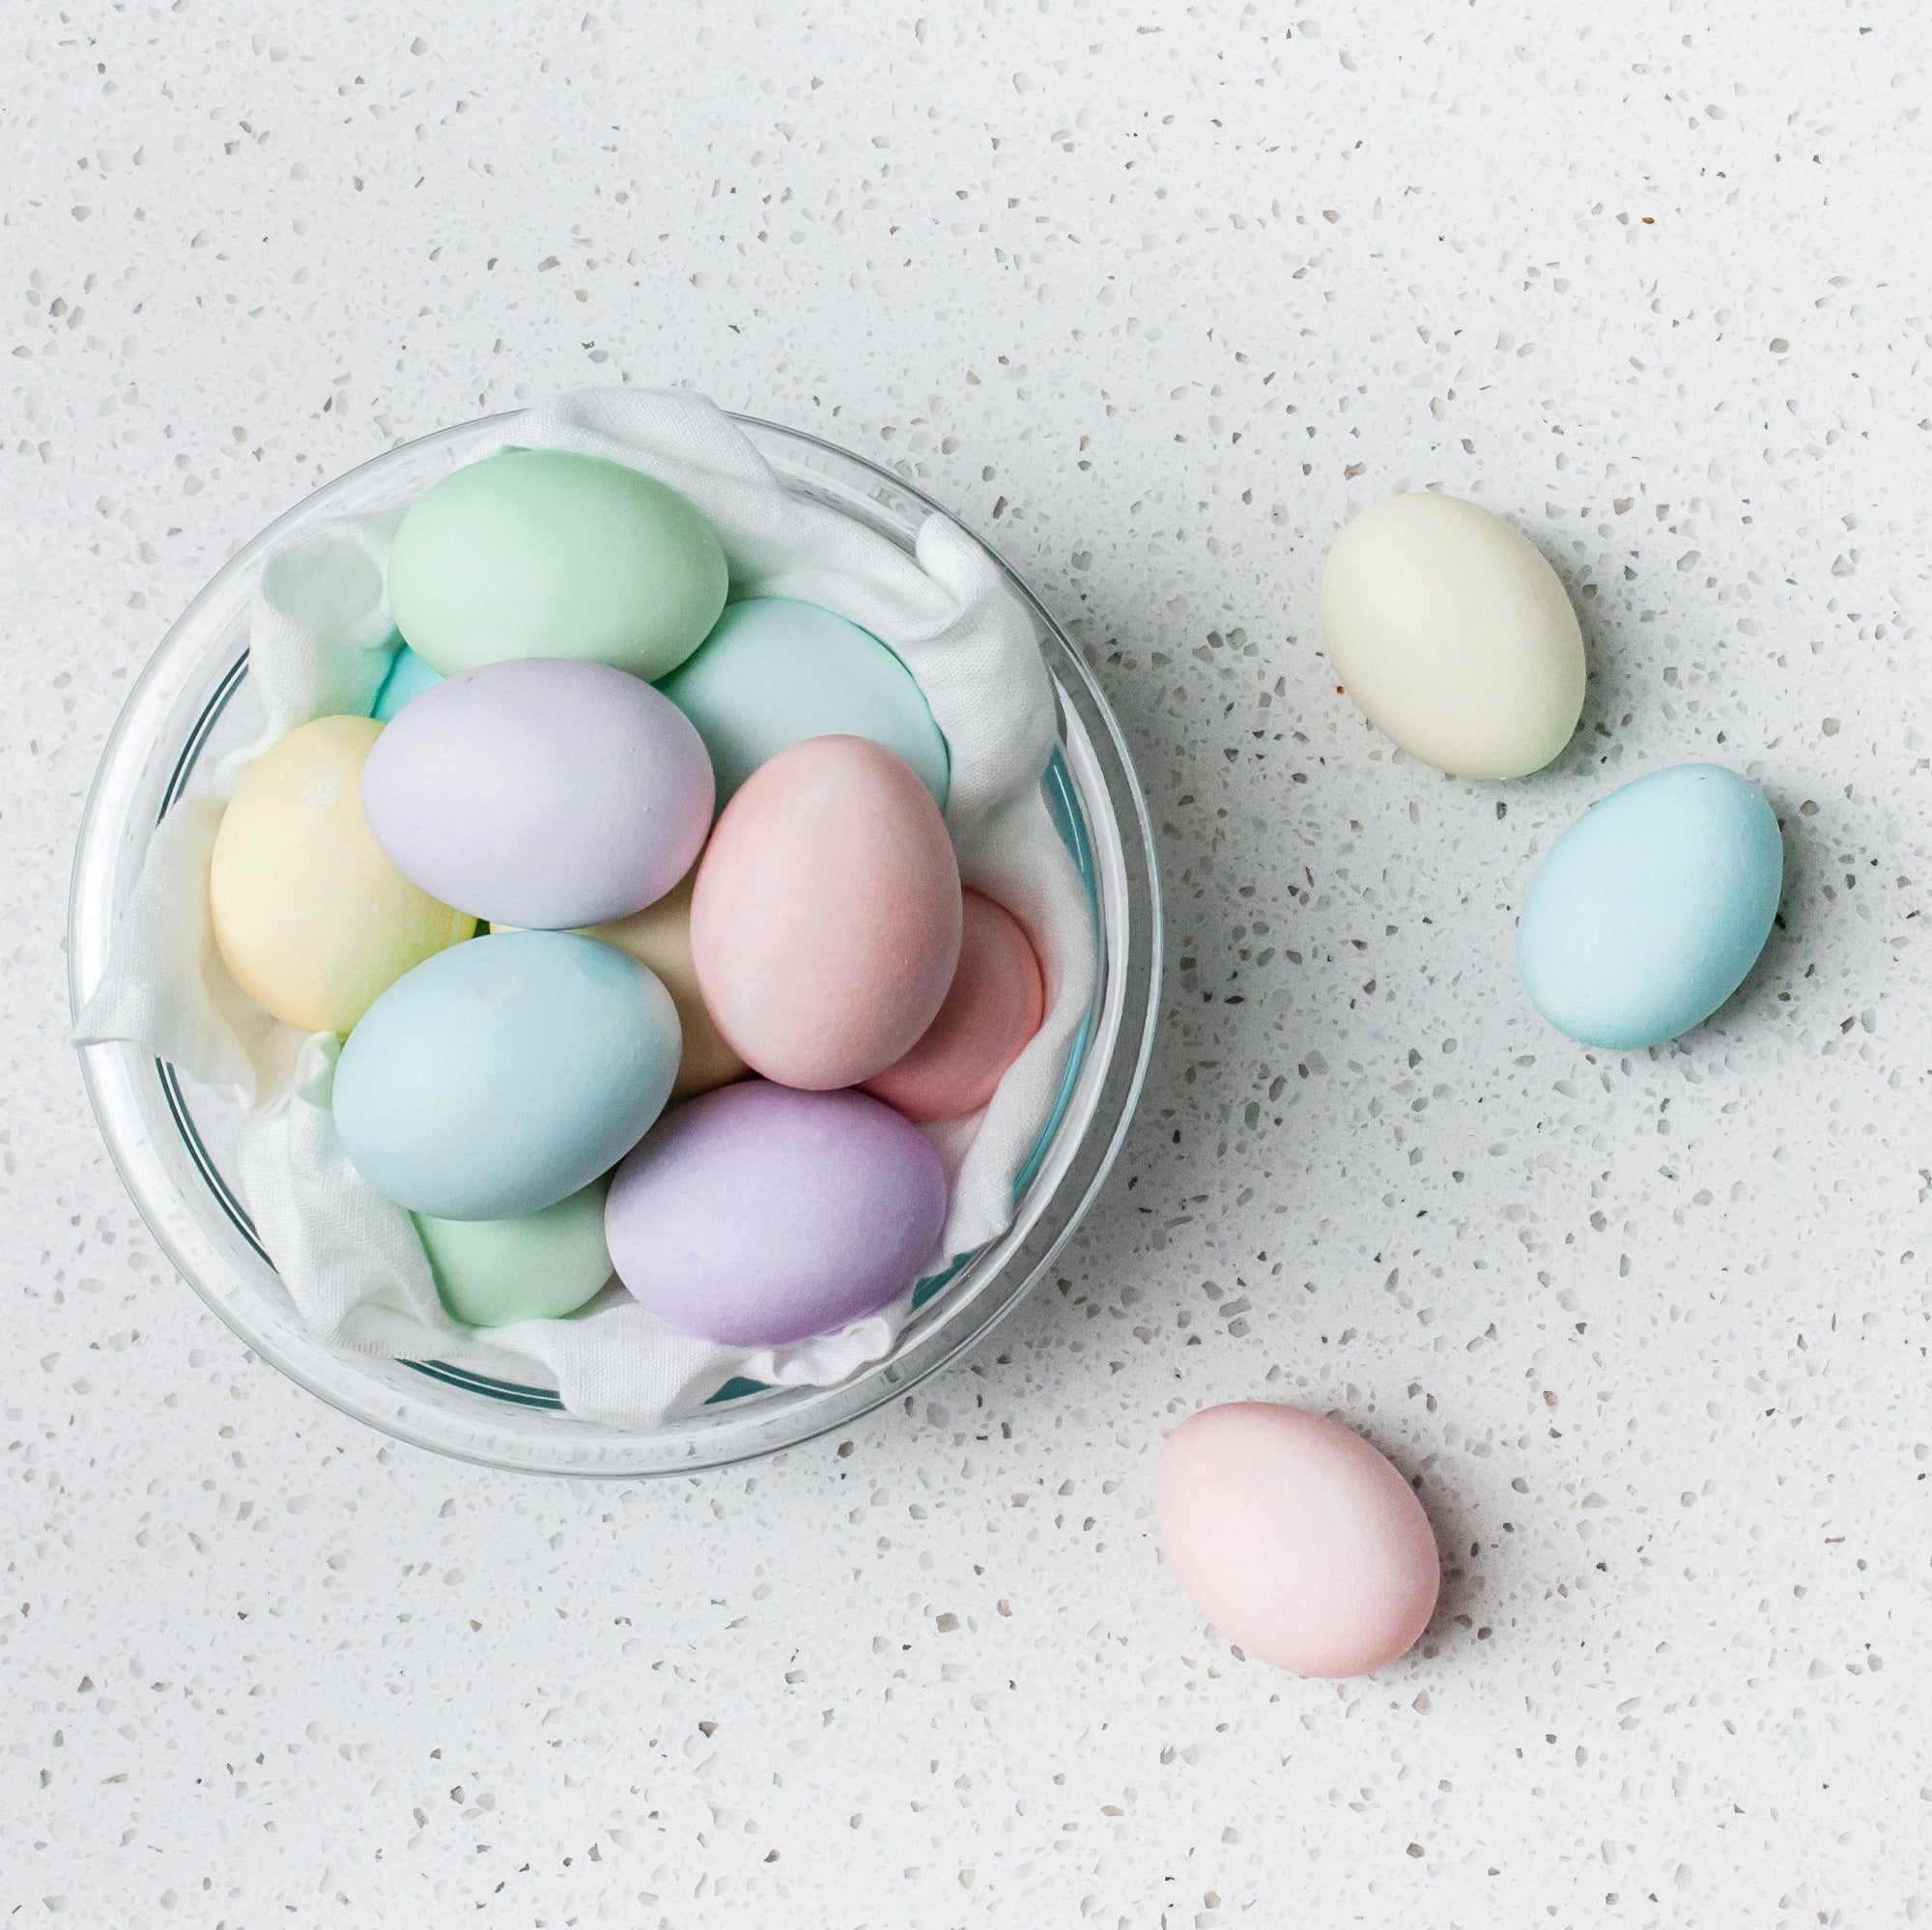 Our Top Ten Easter Basket Picks for 2021